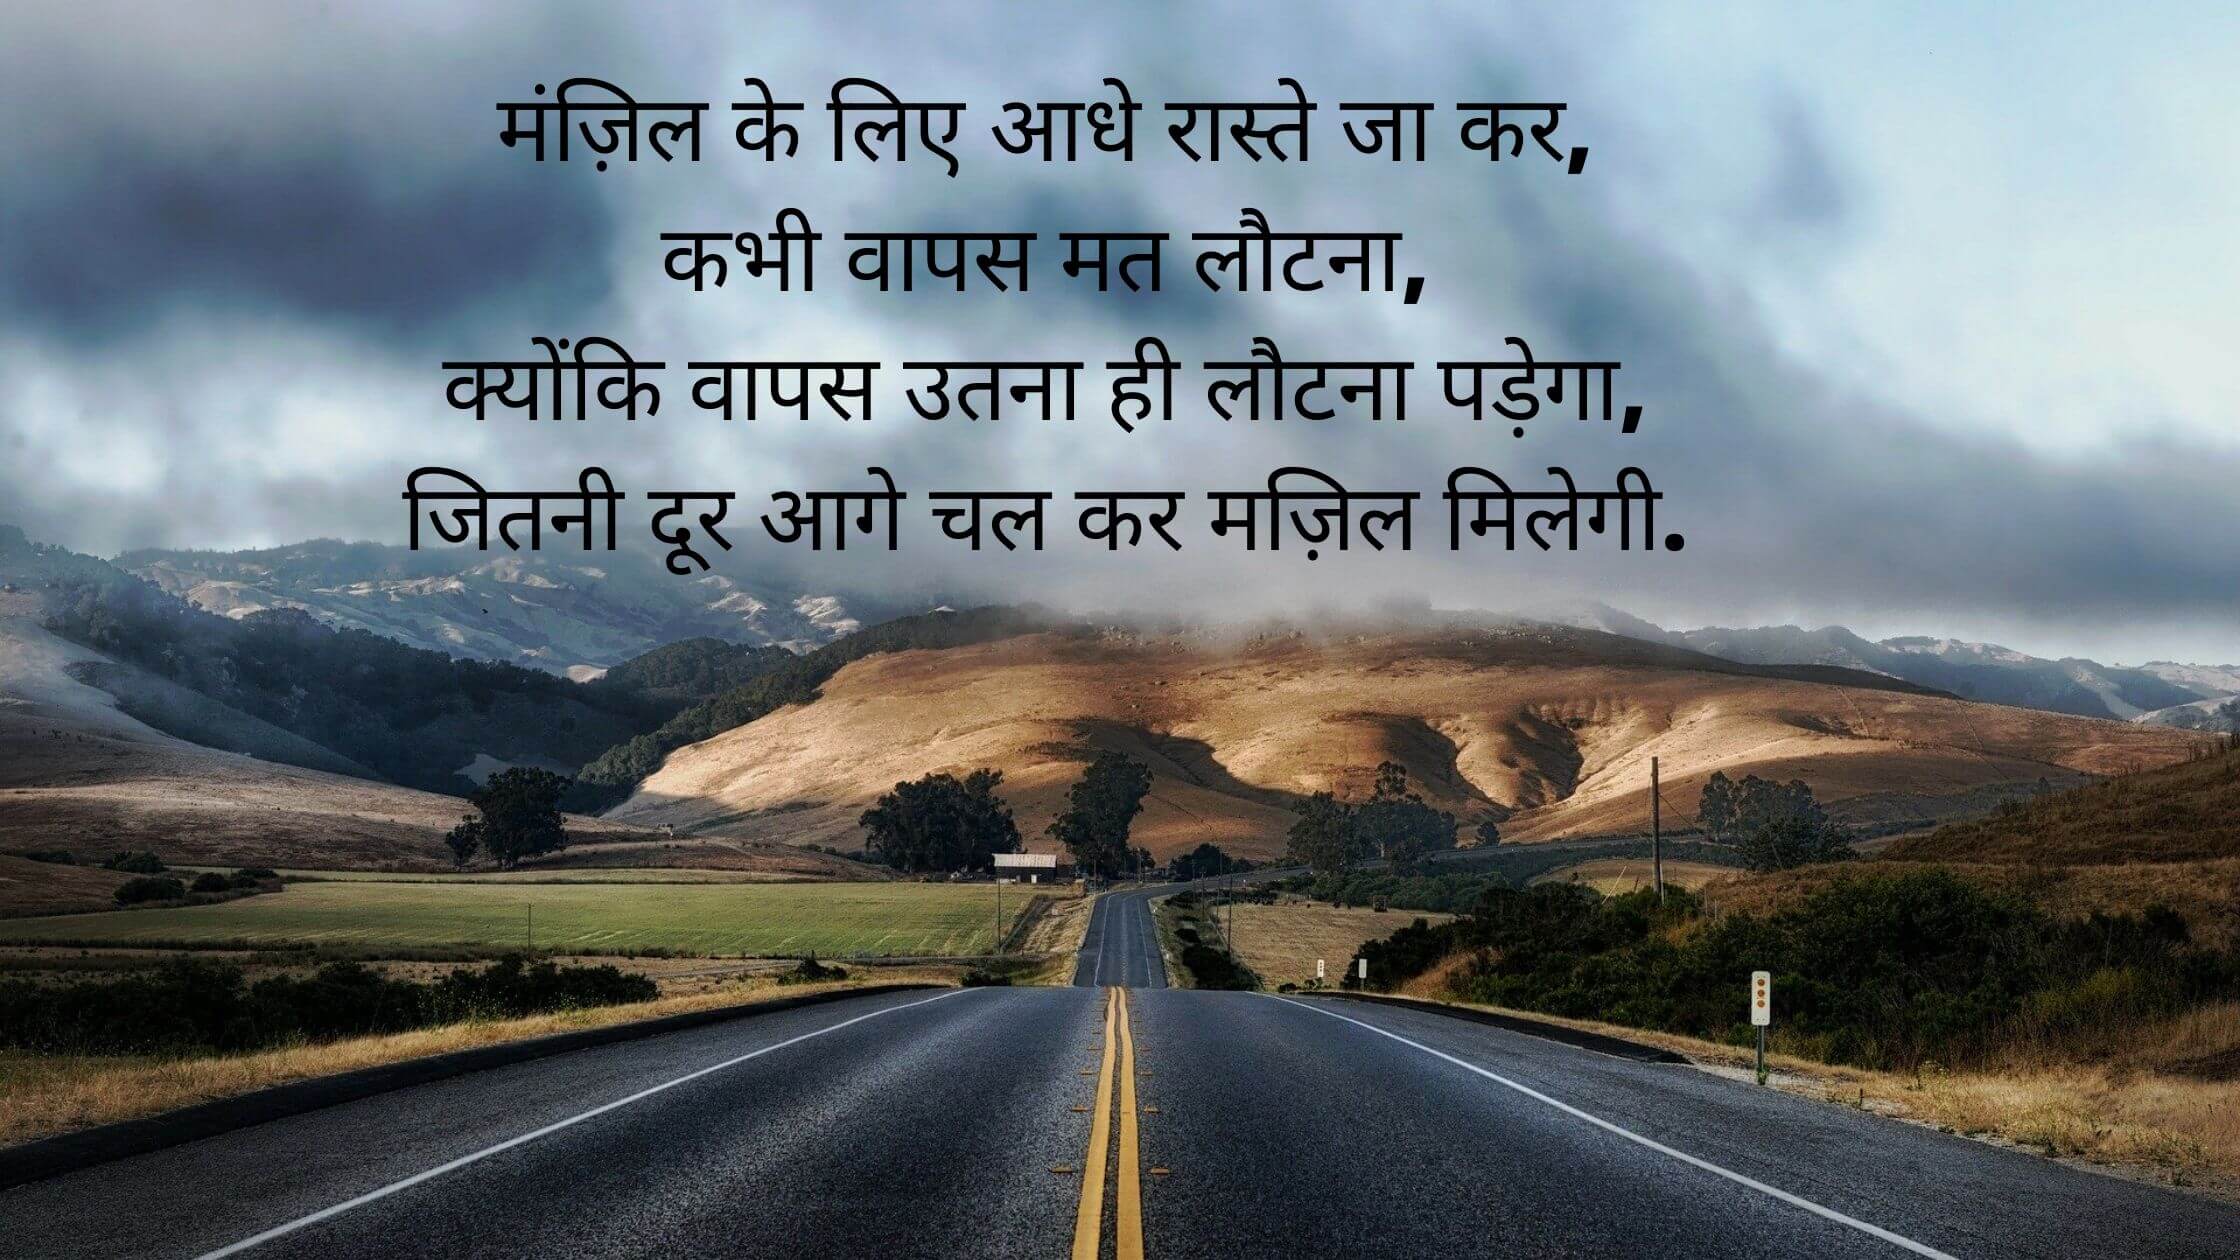 Inspiring Thoughts For Students In Hindi